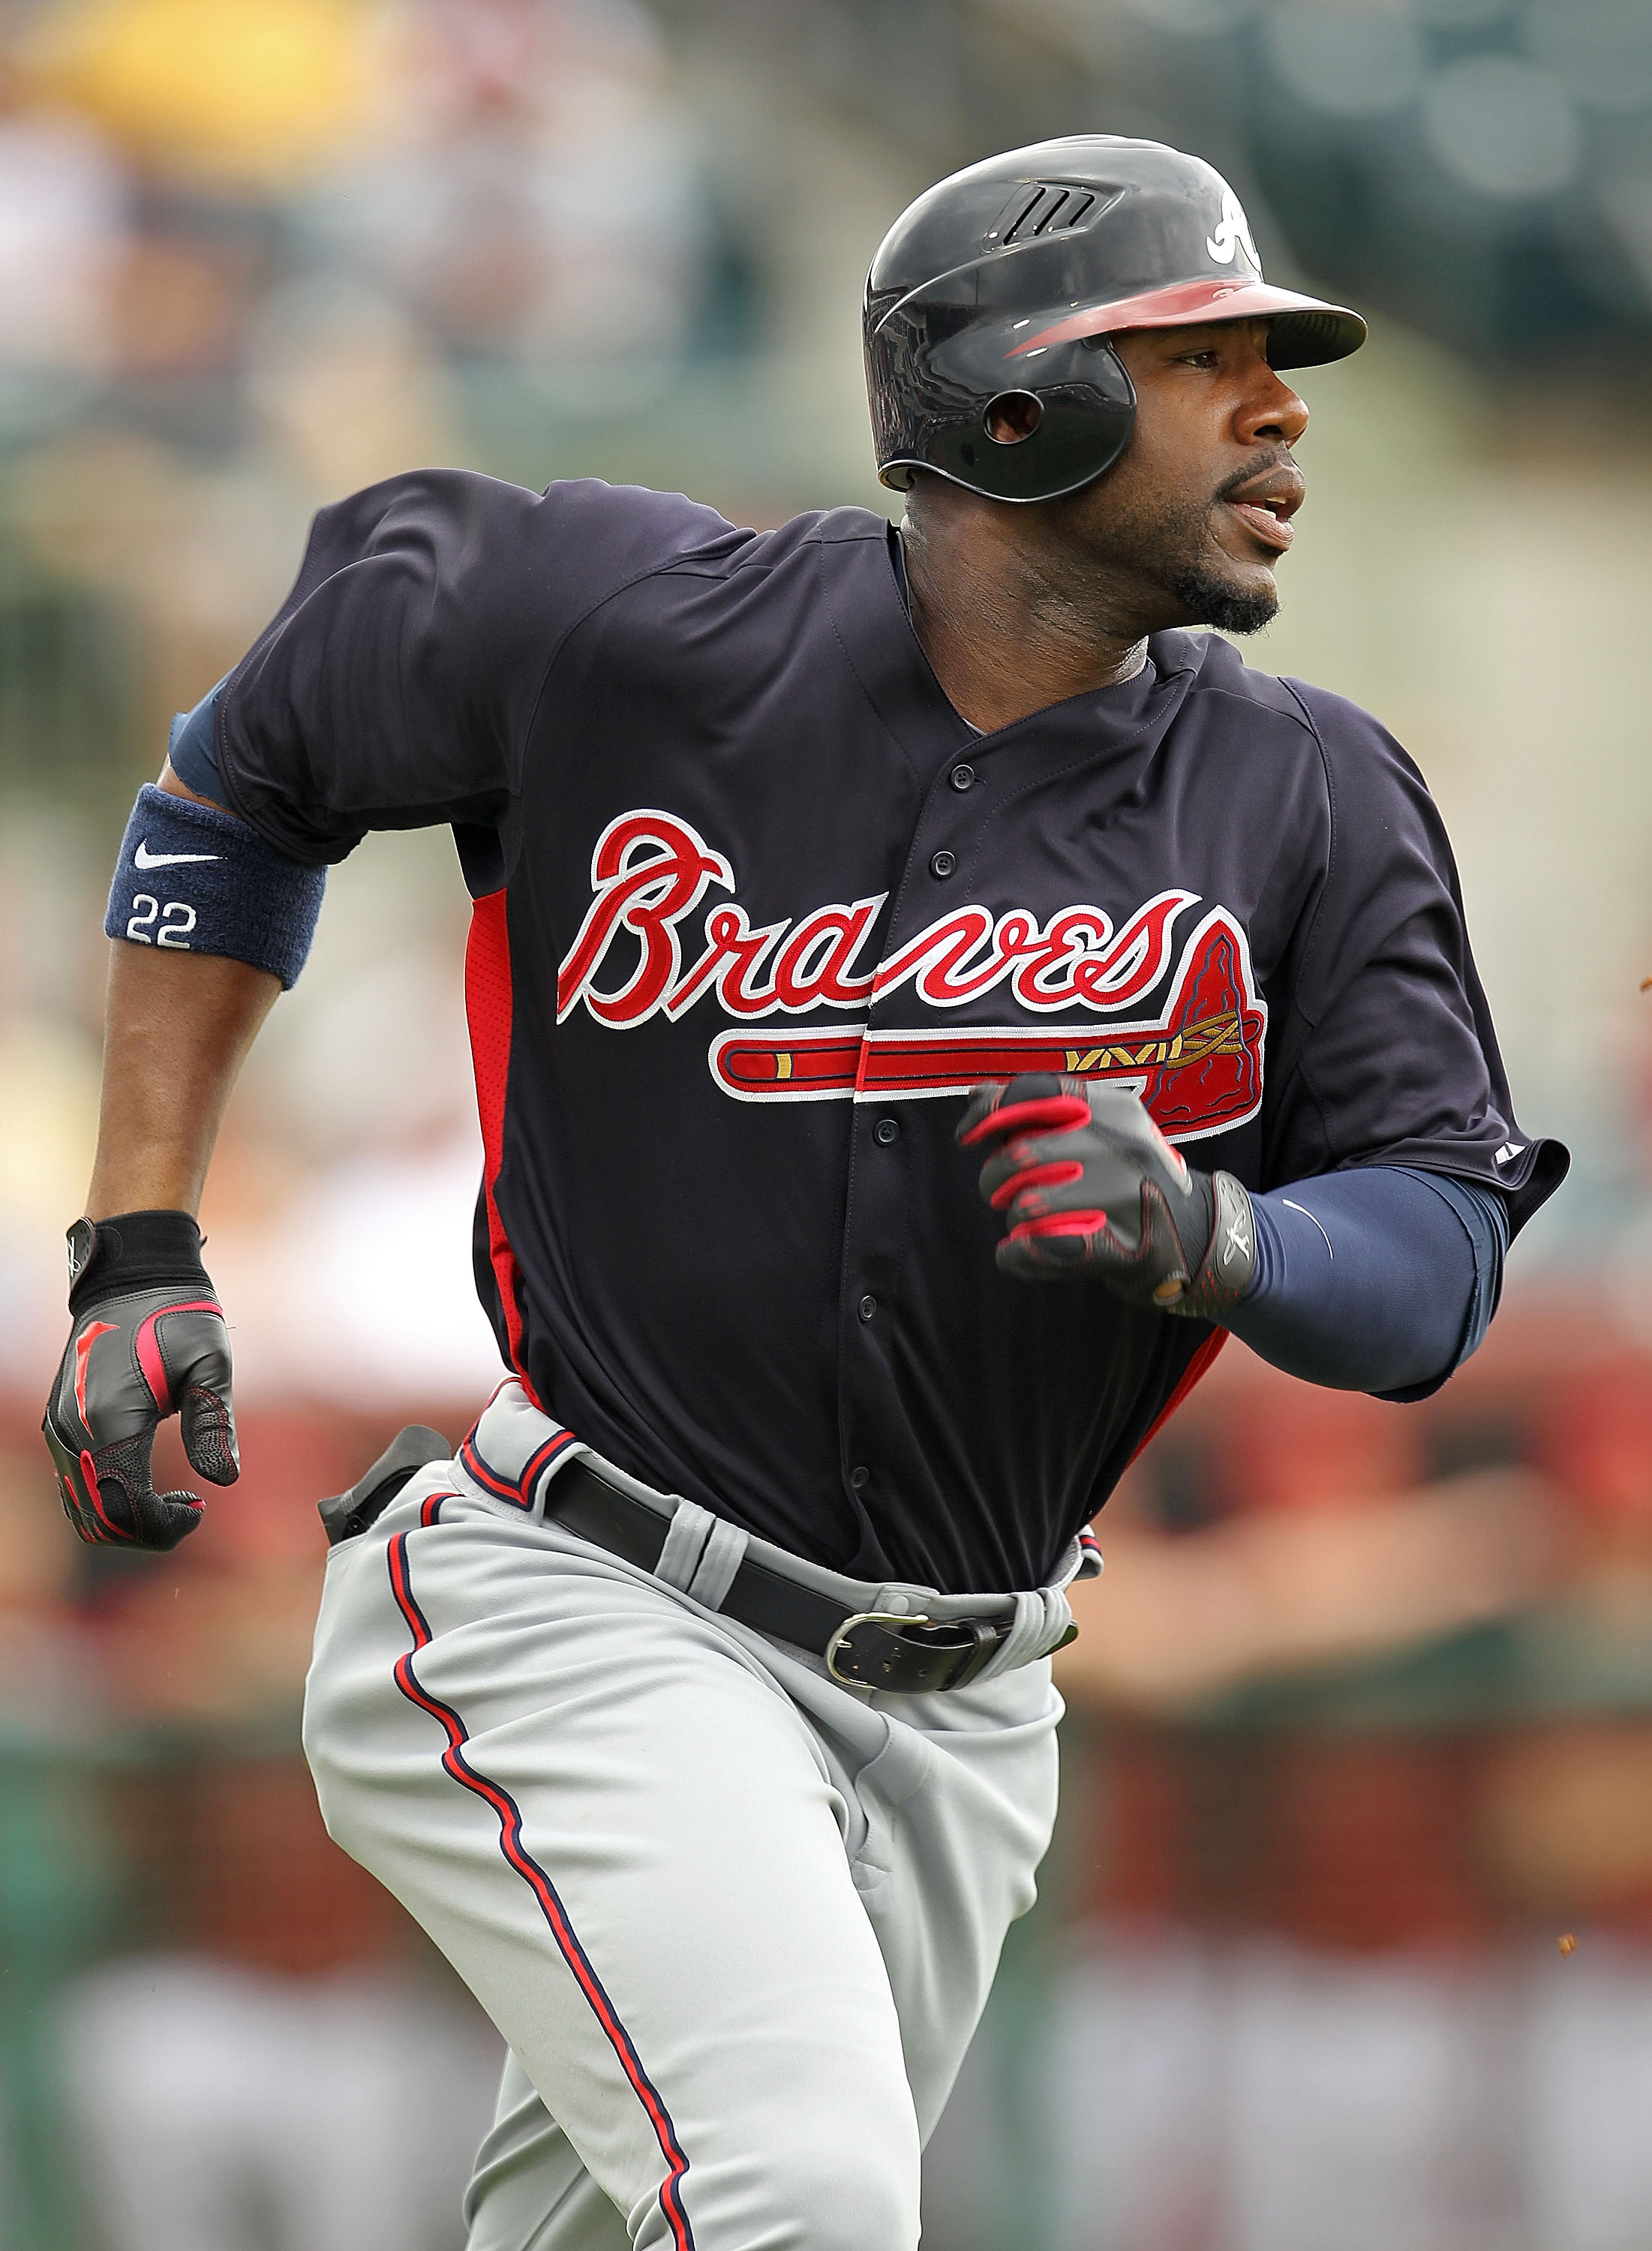 KISSIMMEE, FL - MARCH 01:  Jason Heyward #22 of the Atlanta Braves hits a 2nd inning double during a Spring Training game against the Houston Astros at Osceola County Stadium on March 1, 2011 in Kissimmee, Florida.  (Photo by Mike Ehrmann/Getty Images)